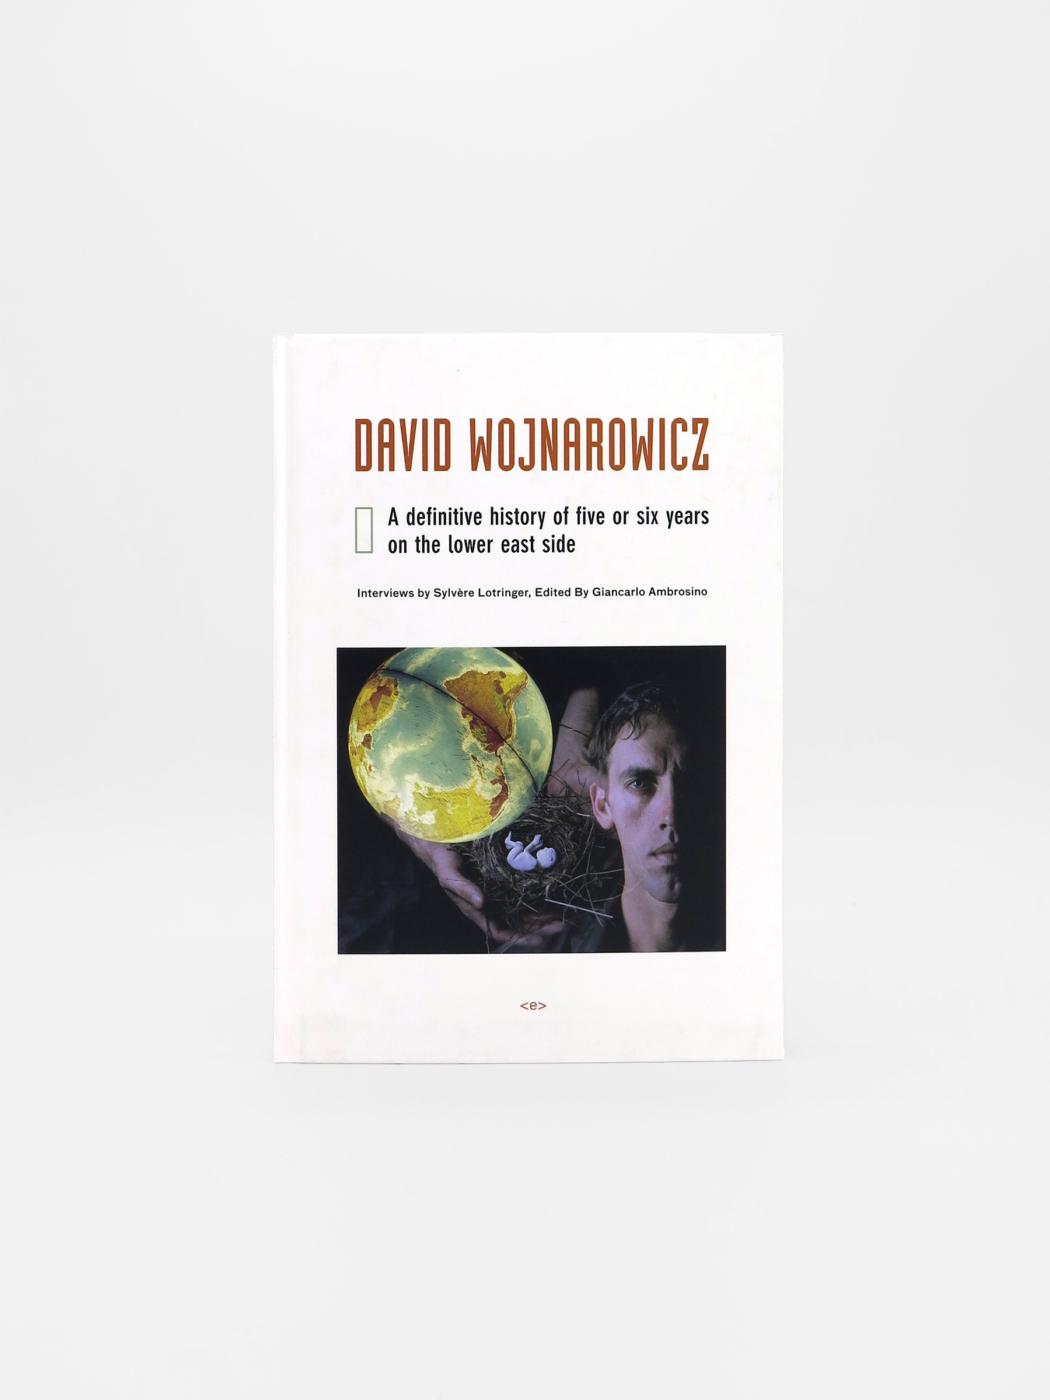 David Wojnarowicz, A Definitive History of Five or Six Years on the Lower East Side